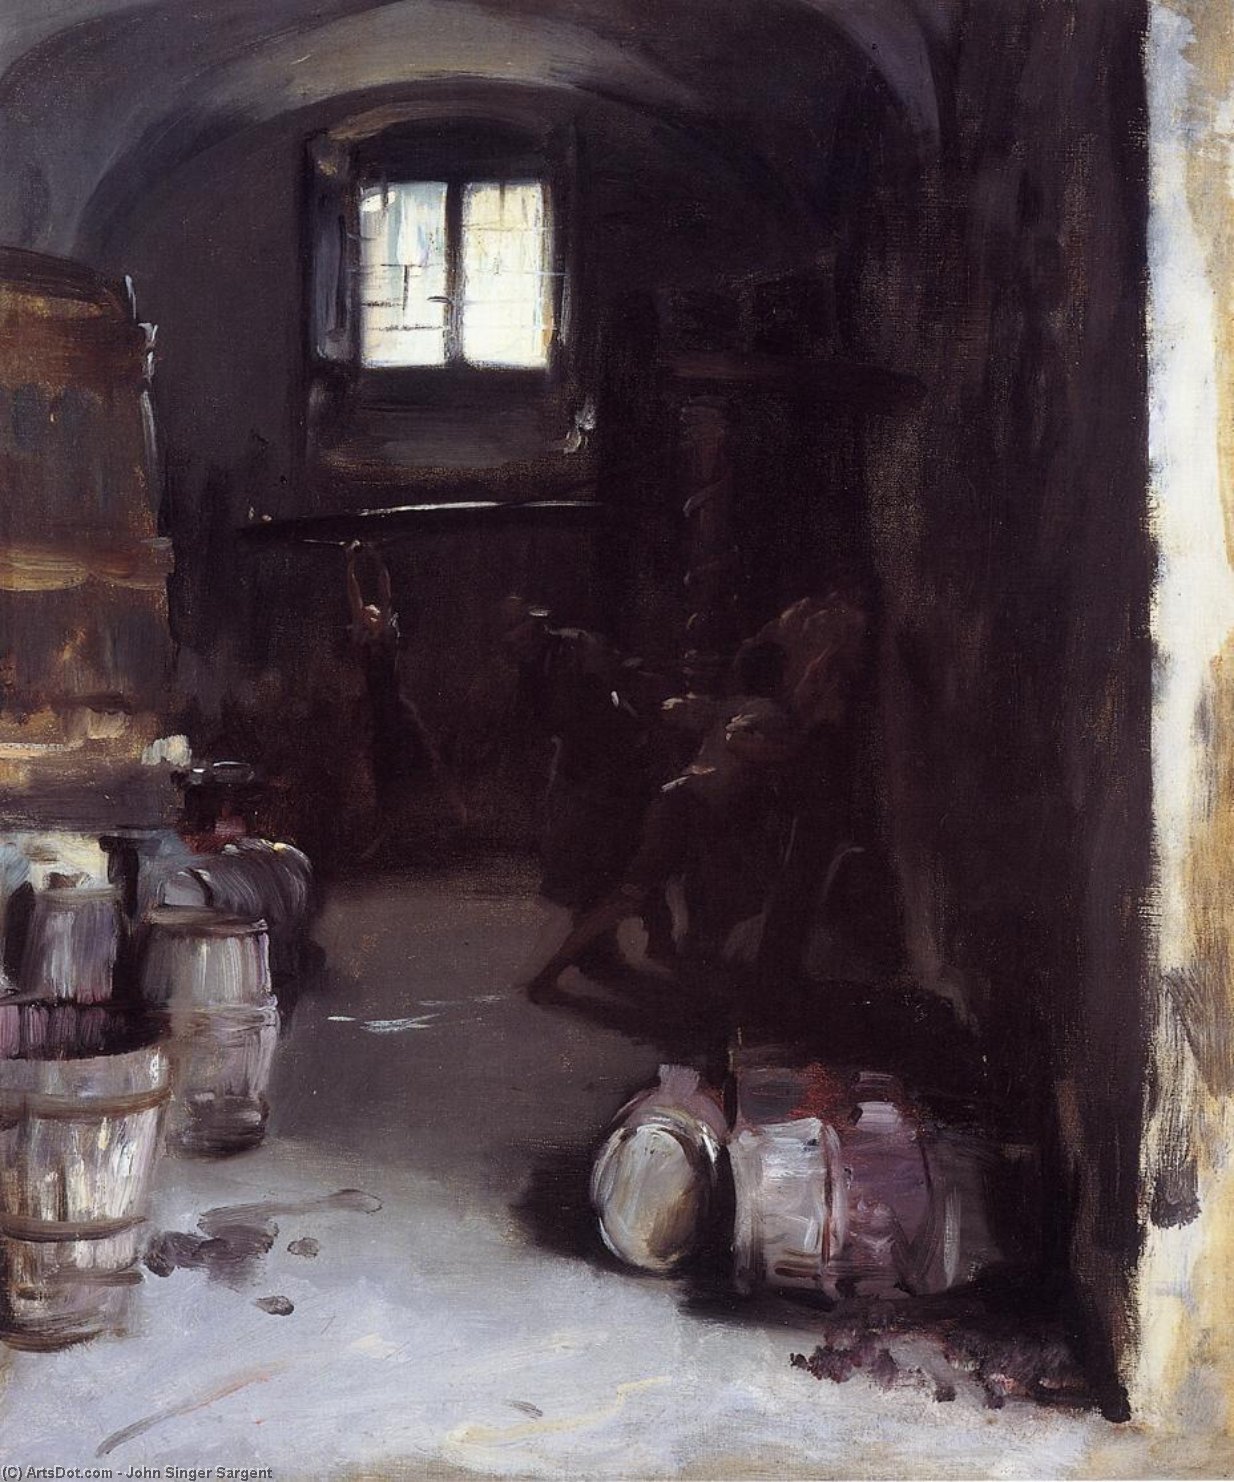 Order Paintings Reproductions Pressing the Grapes: Florentine Wine Cellar, 1882 by John Singer Sargent (1856-1925, Italy) | ArtsDot.com